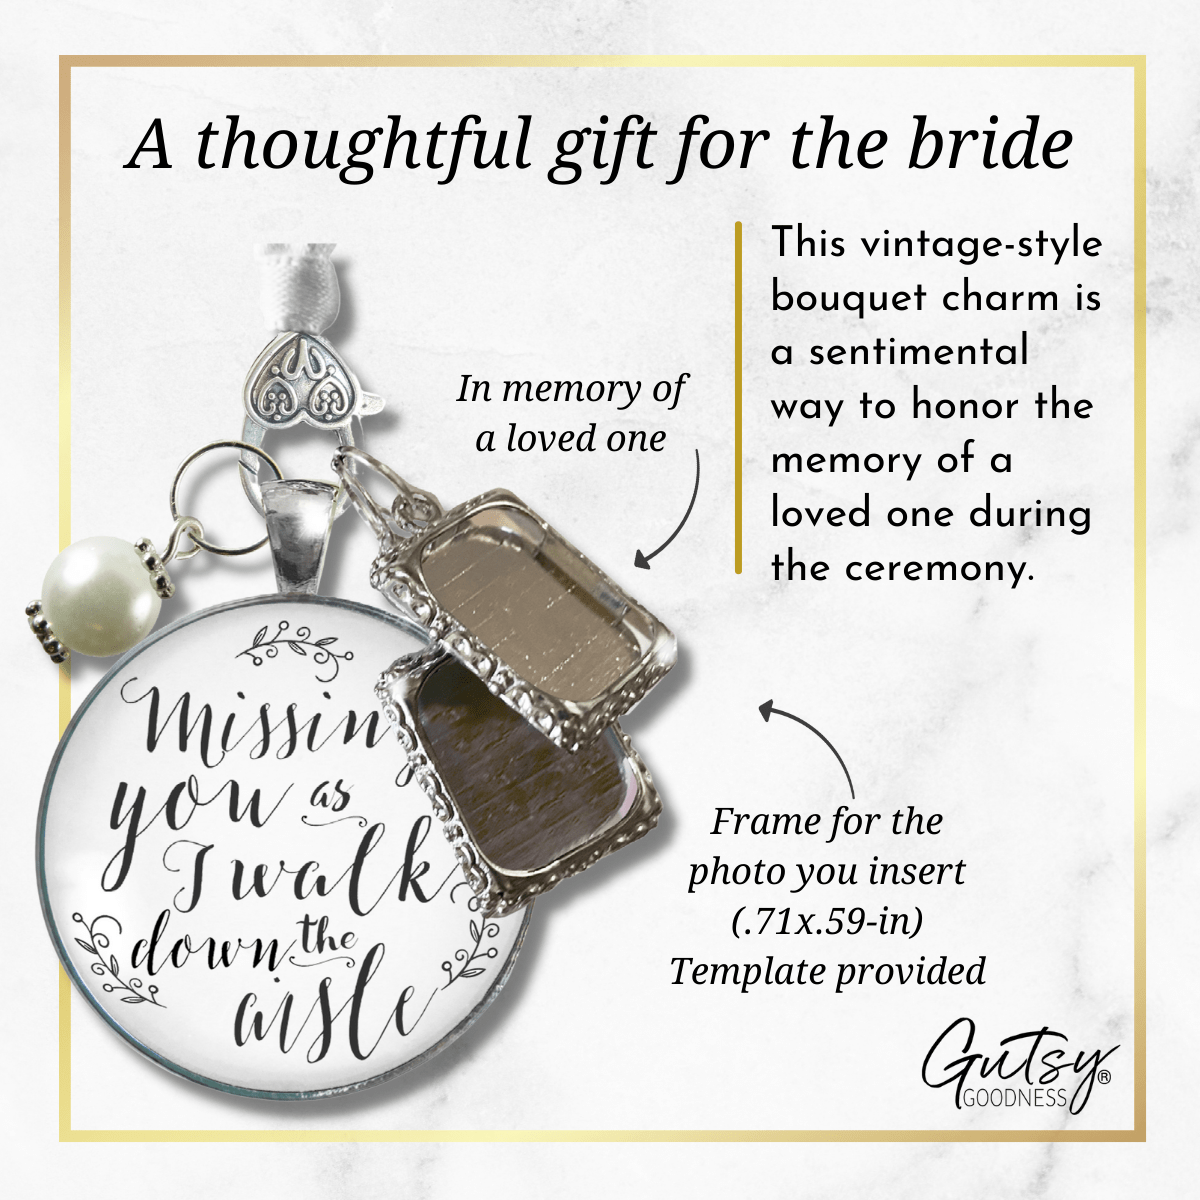 Bouquet Wedding Charm Missing You Silver Tone Bridal Memorial Photo Jewelry 2 Frames - Gutsy Goodness Handmade Jewelry Gifts